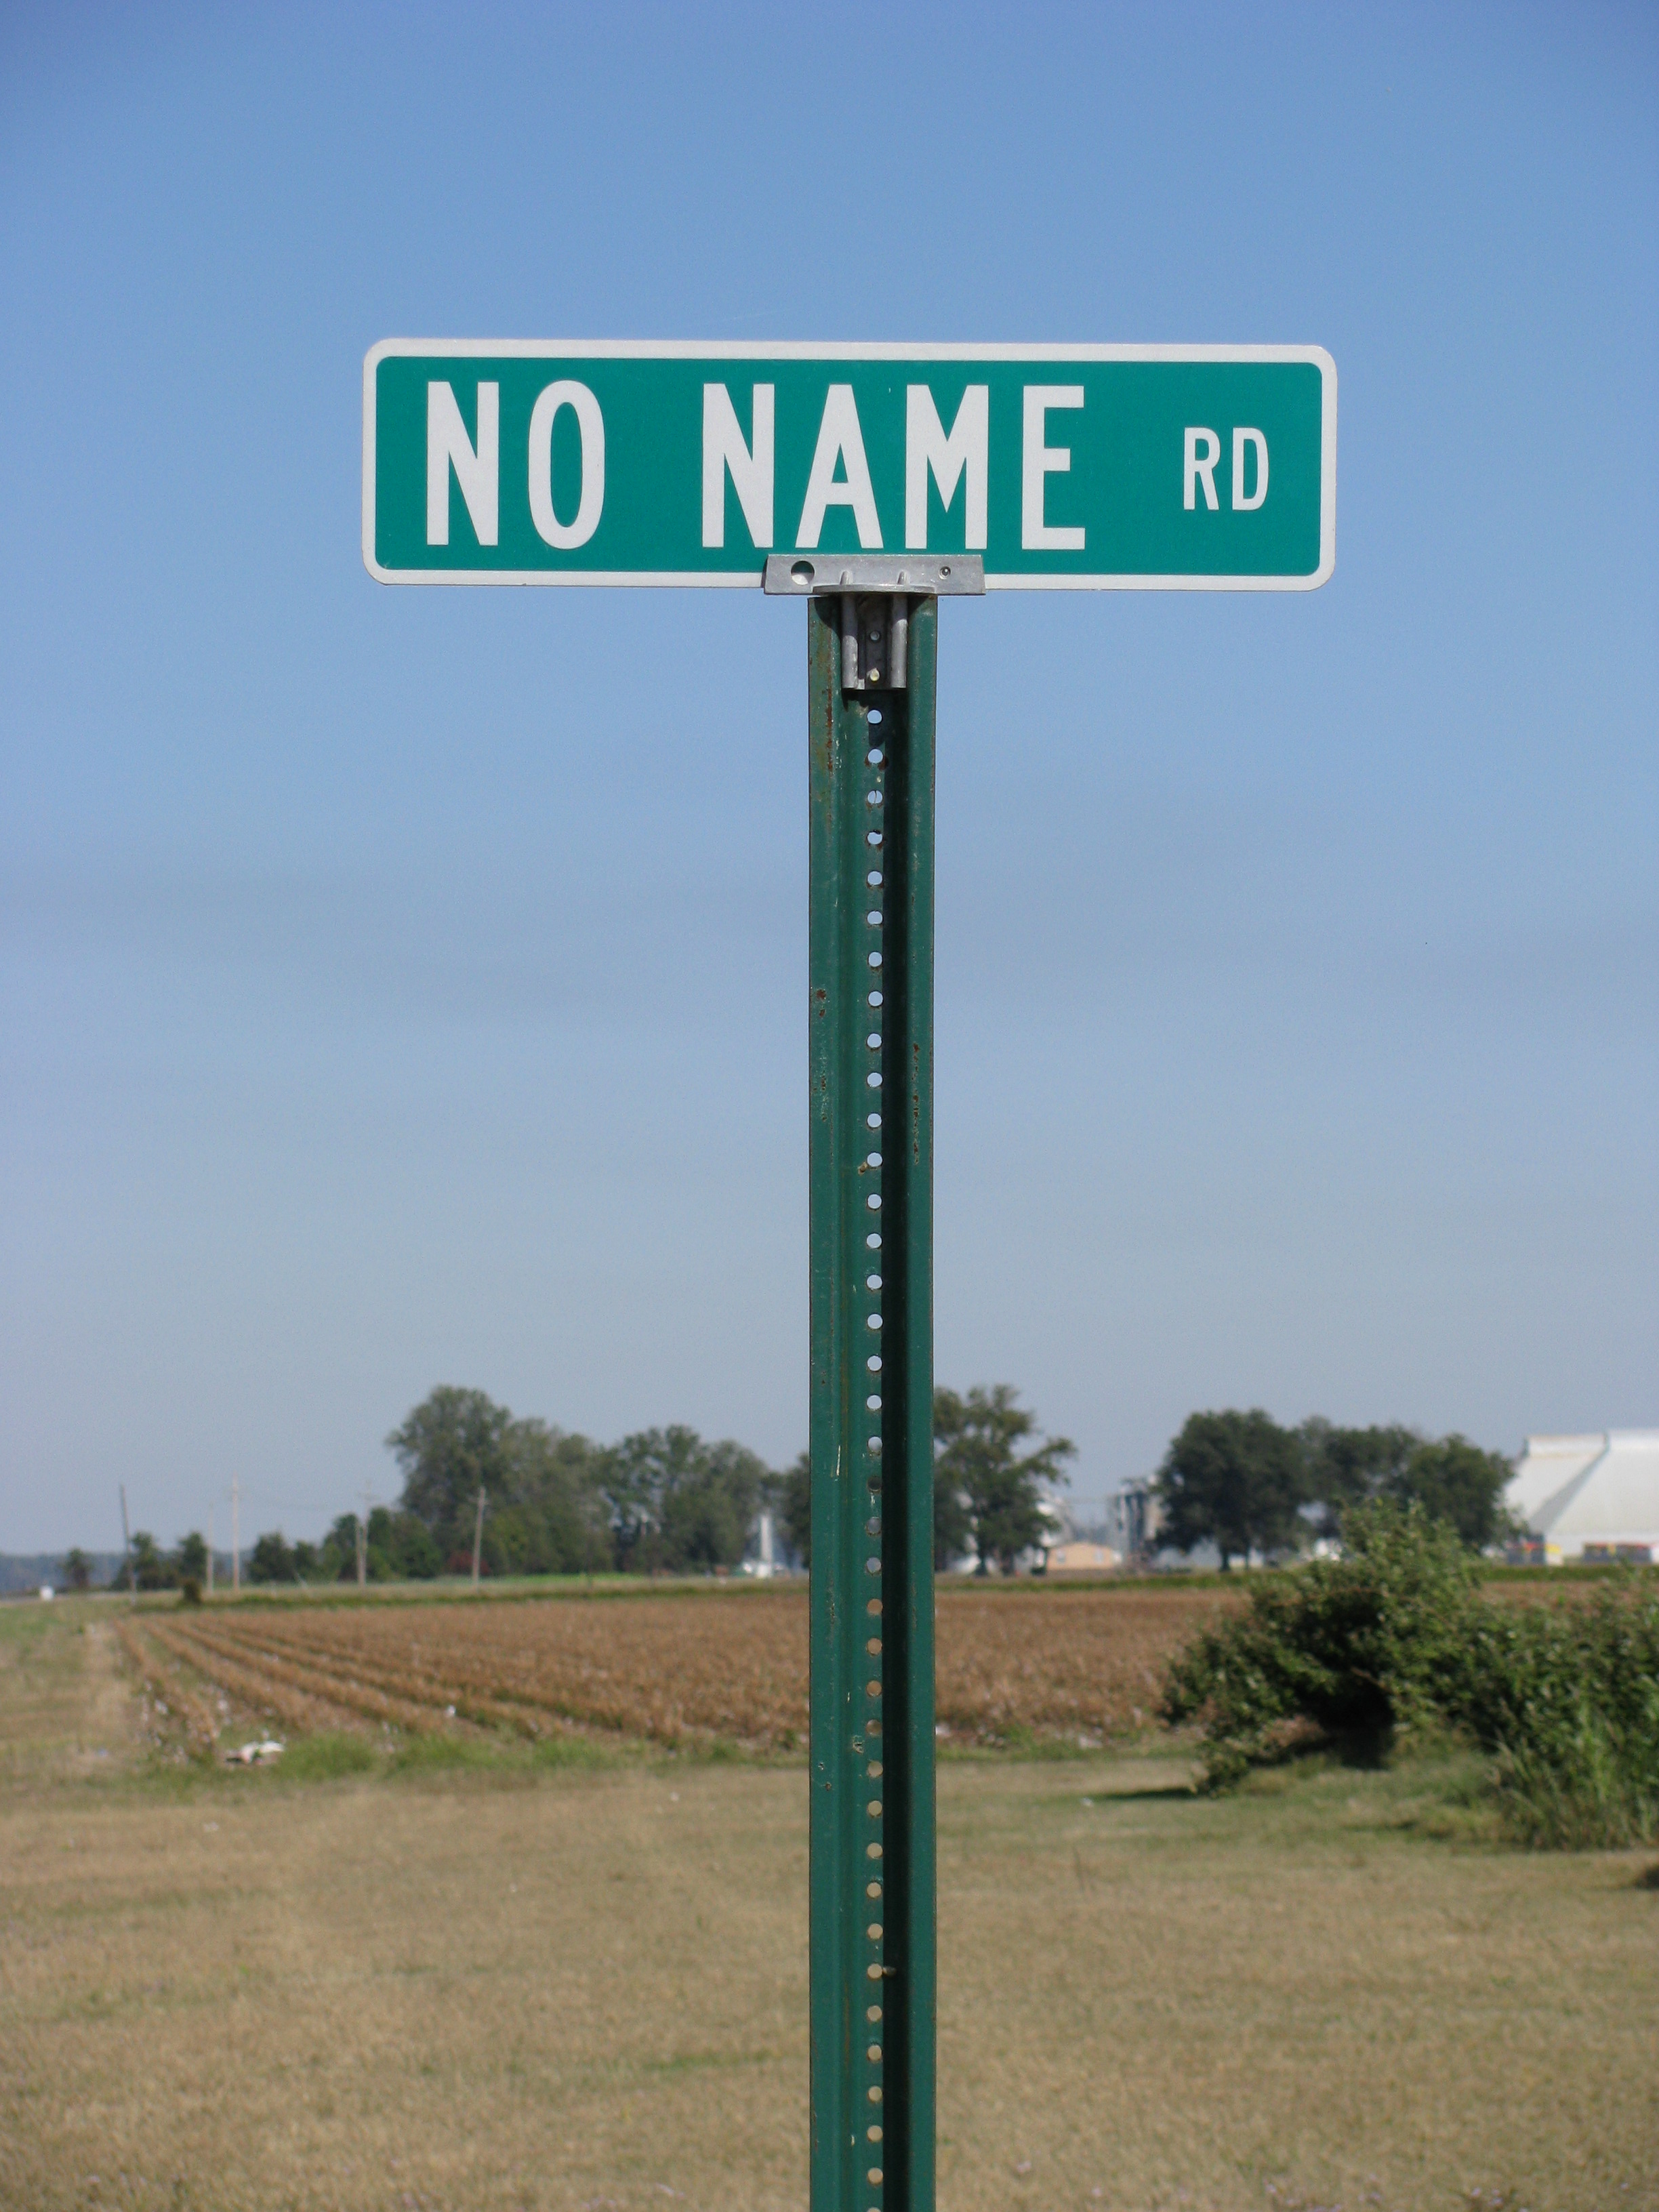 A photograph of a street sign with the words “No Name.” on it